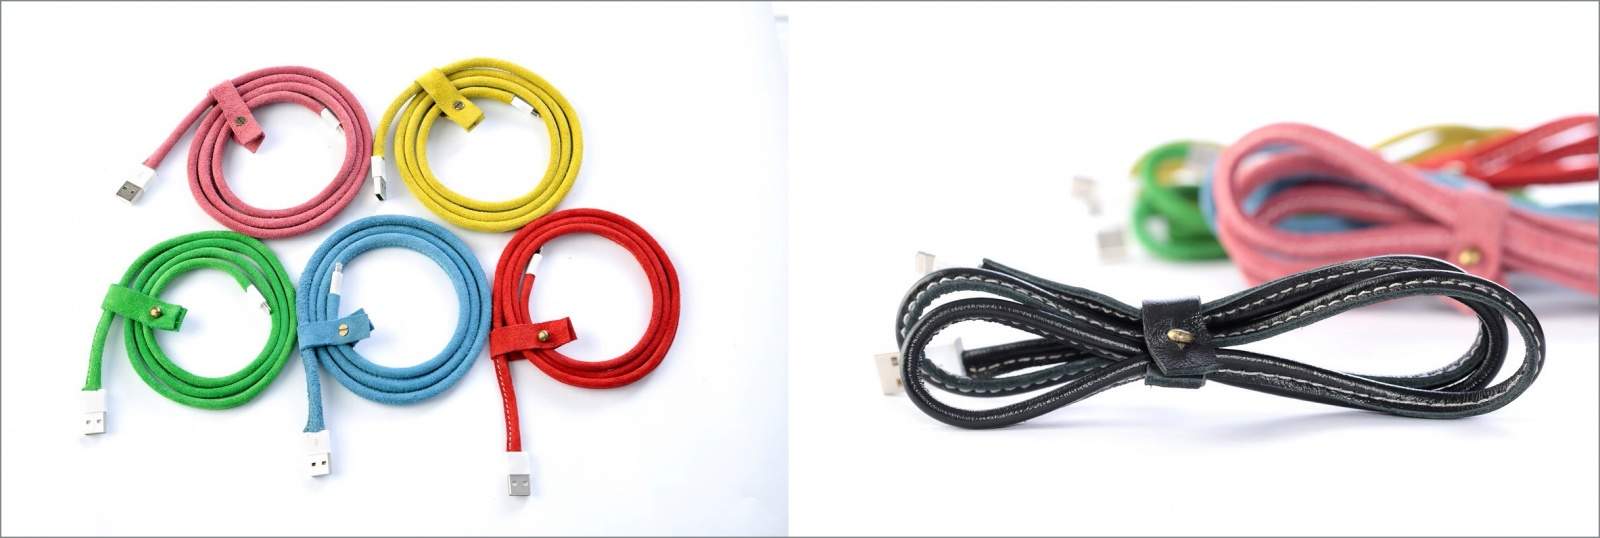 Esbee leather cable